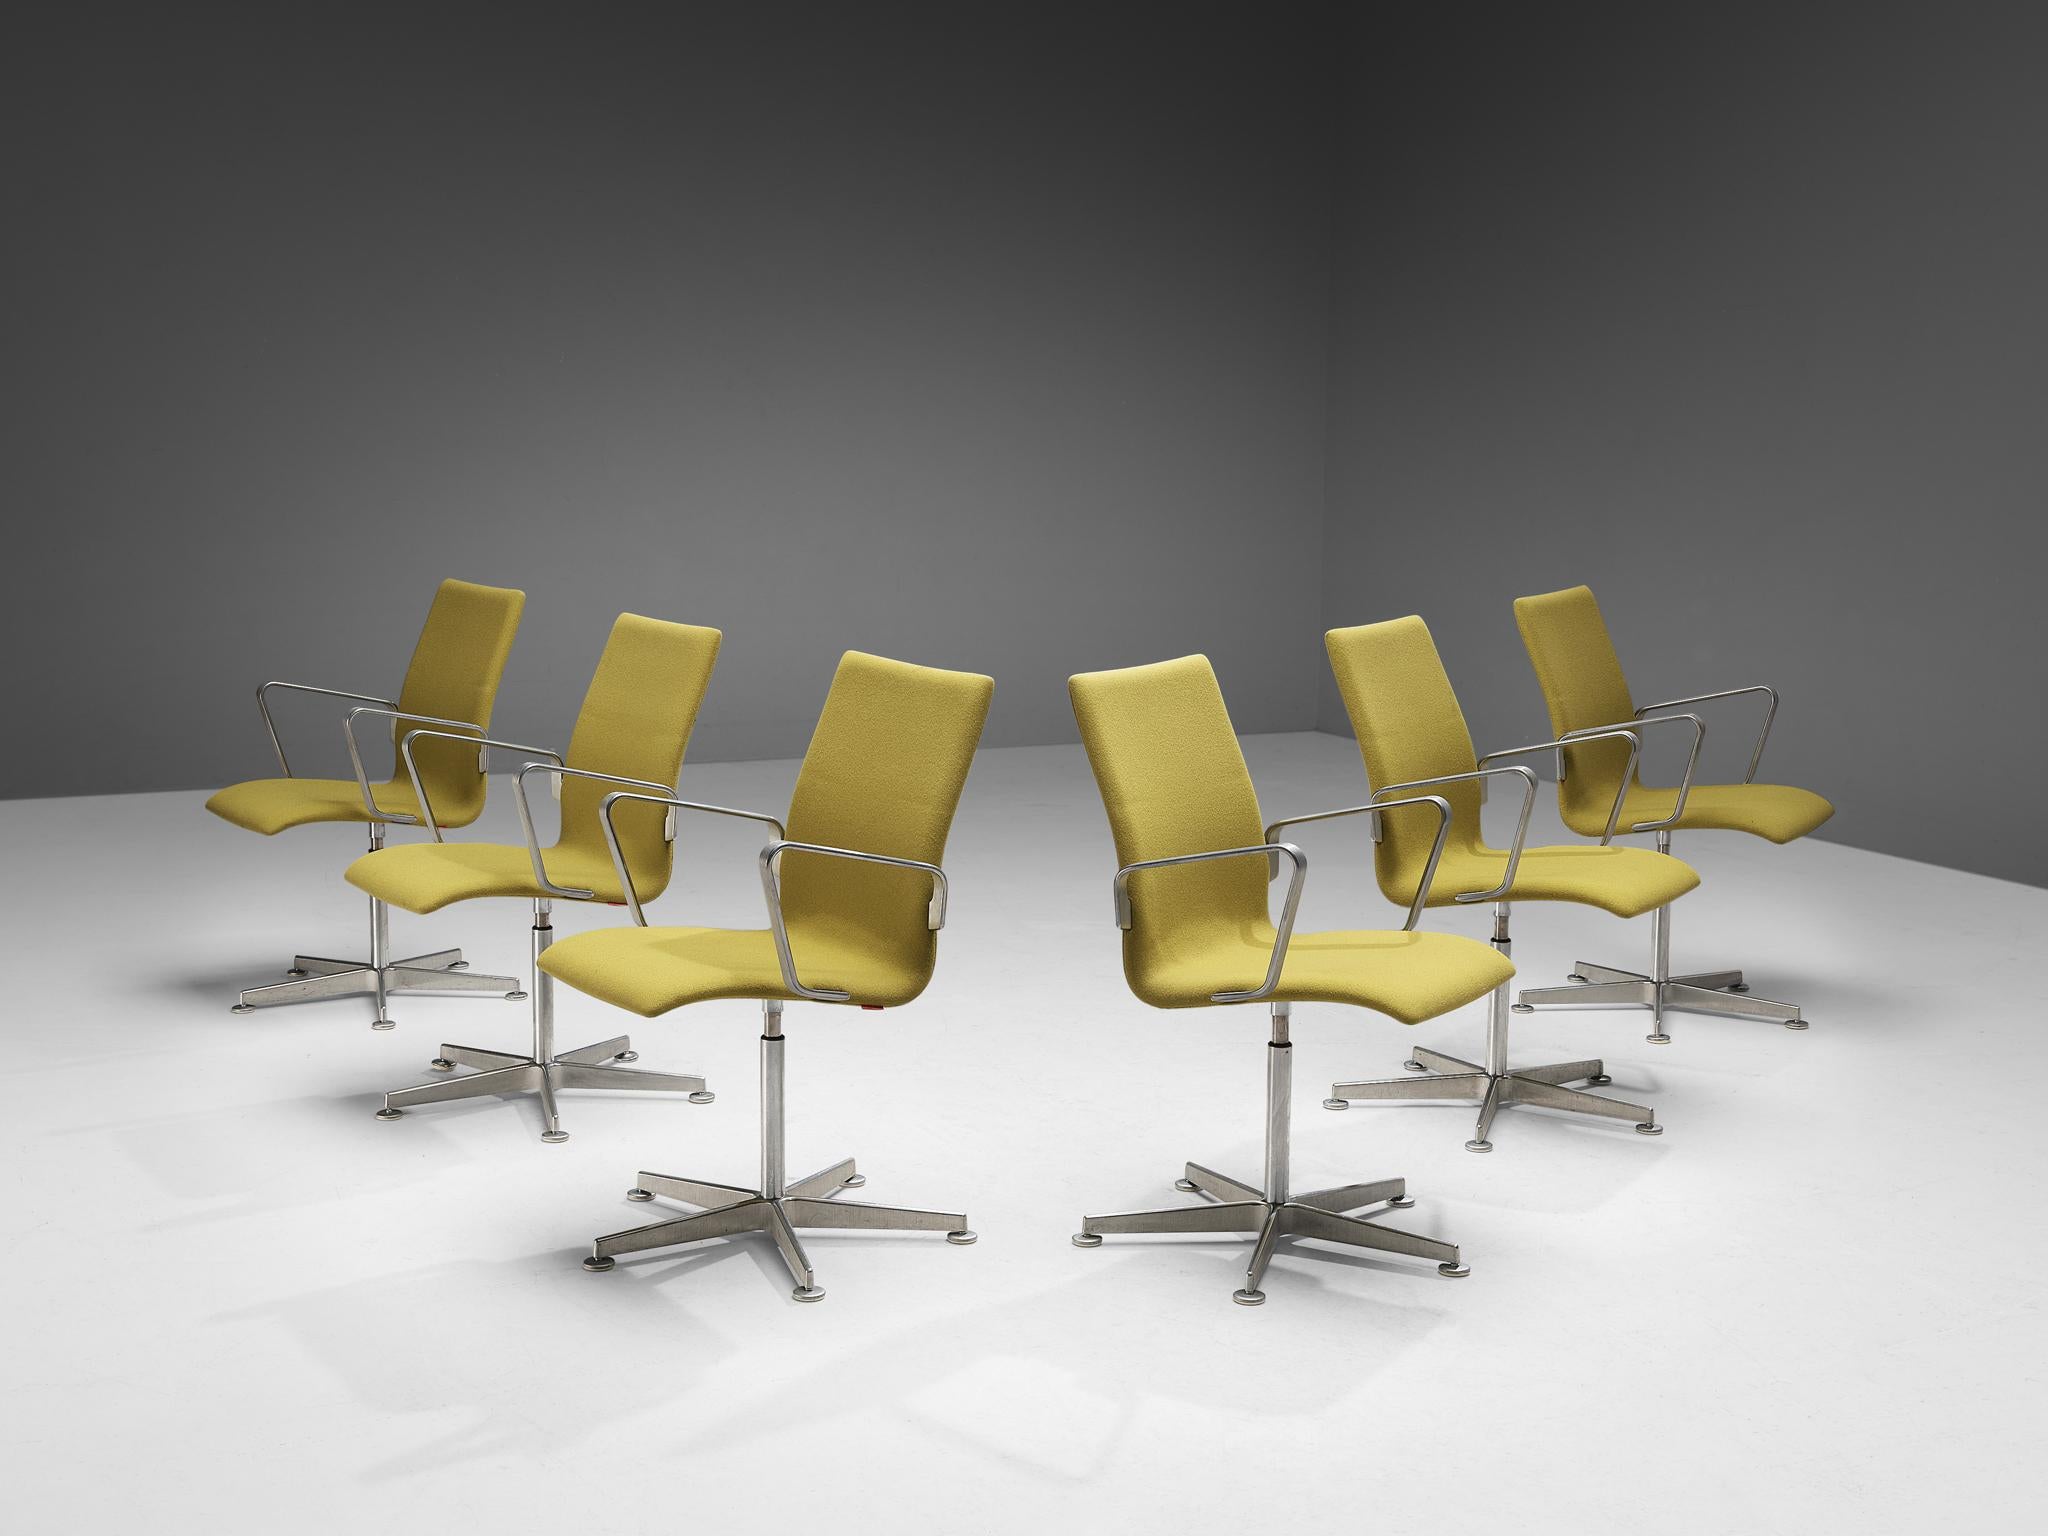 Arne Jacobsen for Fritz Hansen, set of eight 'Oxford' chairs, metal, yellow fabric, Denmark, design 1965.

These classic executive office chairs feature a medium high back (as opposed to the models with a low and a very high back), swivel